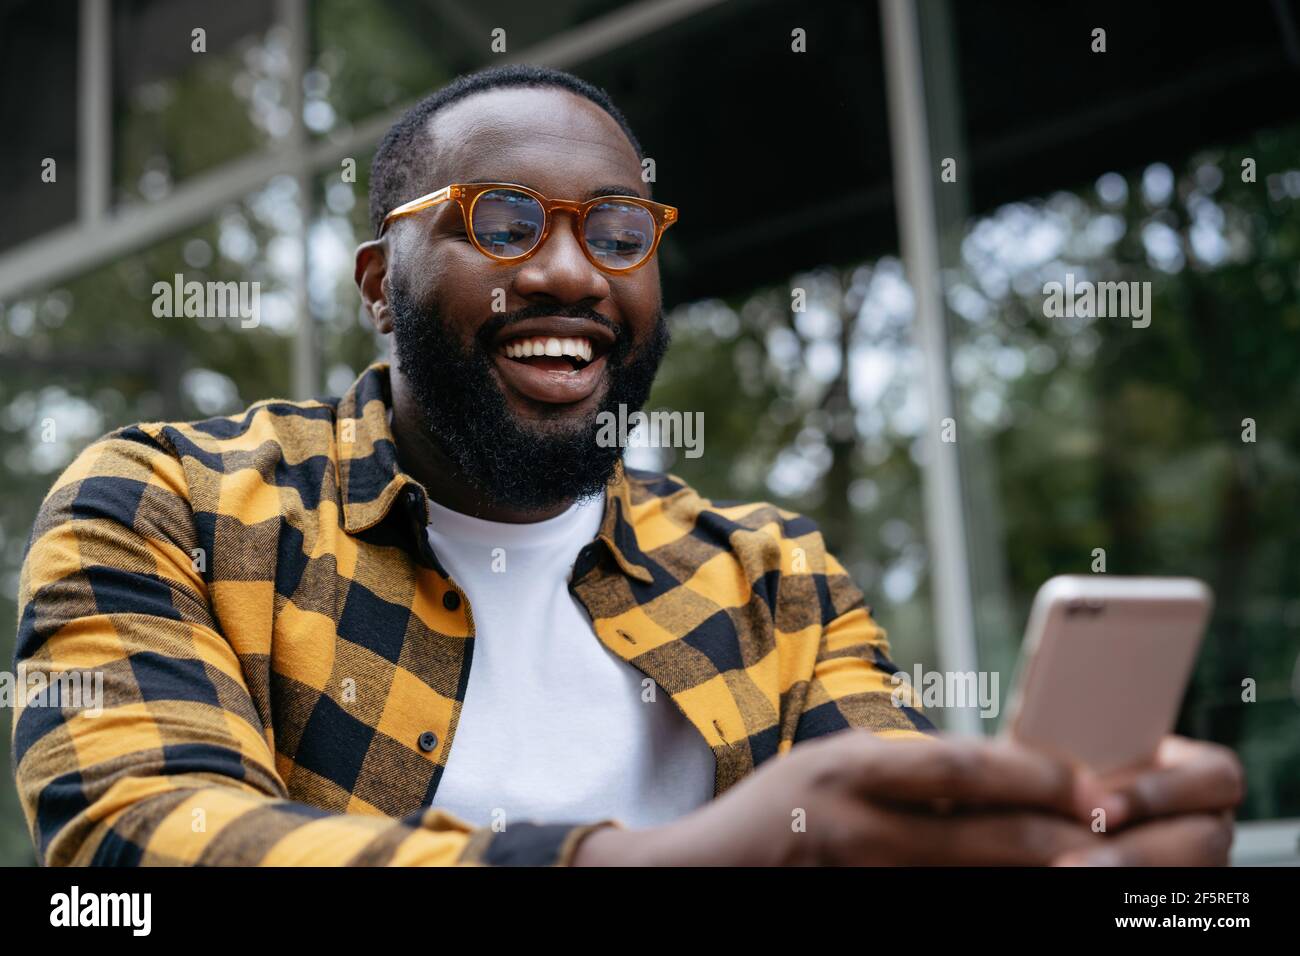 African man using mobile phone. Emotional guy holding smartphone, watching video Stock Photo